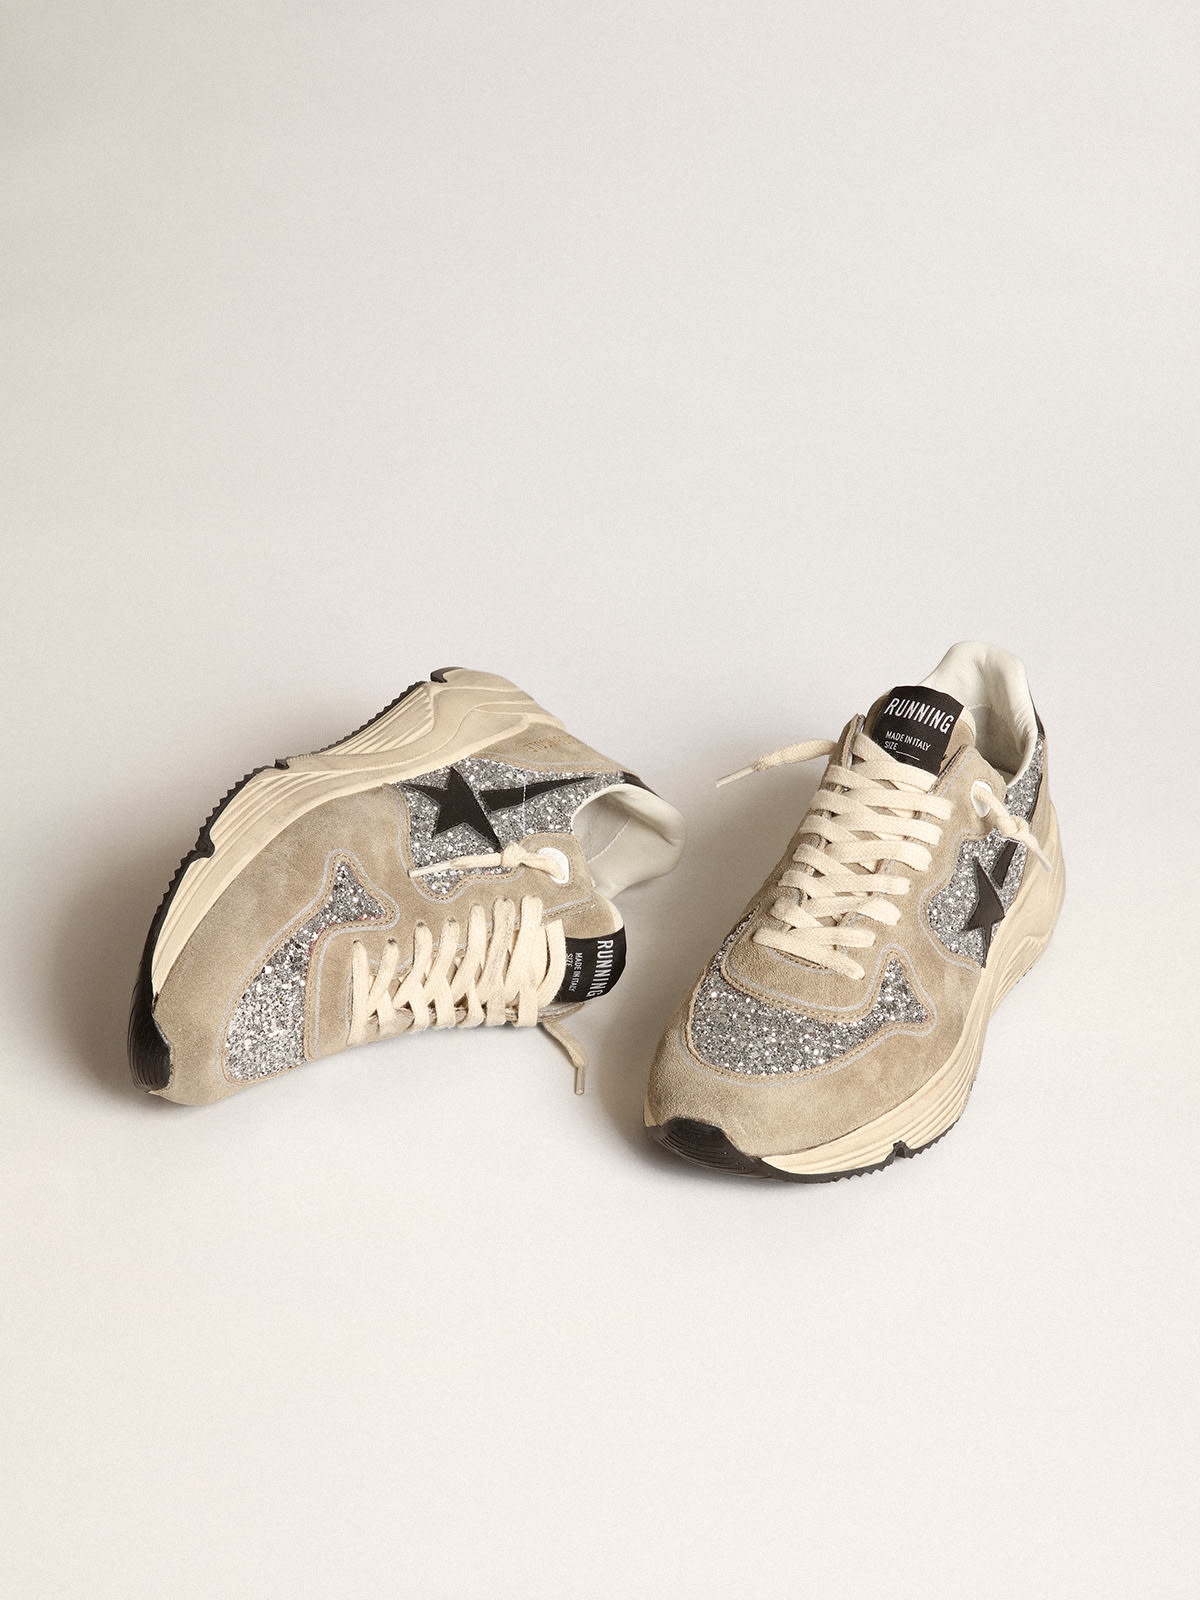 Running Sole sneakers in silver glitter and dove-gray suede with black leather star - 2